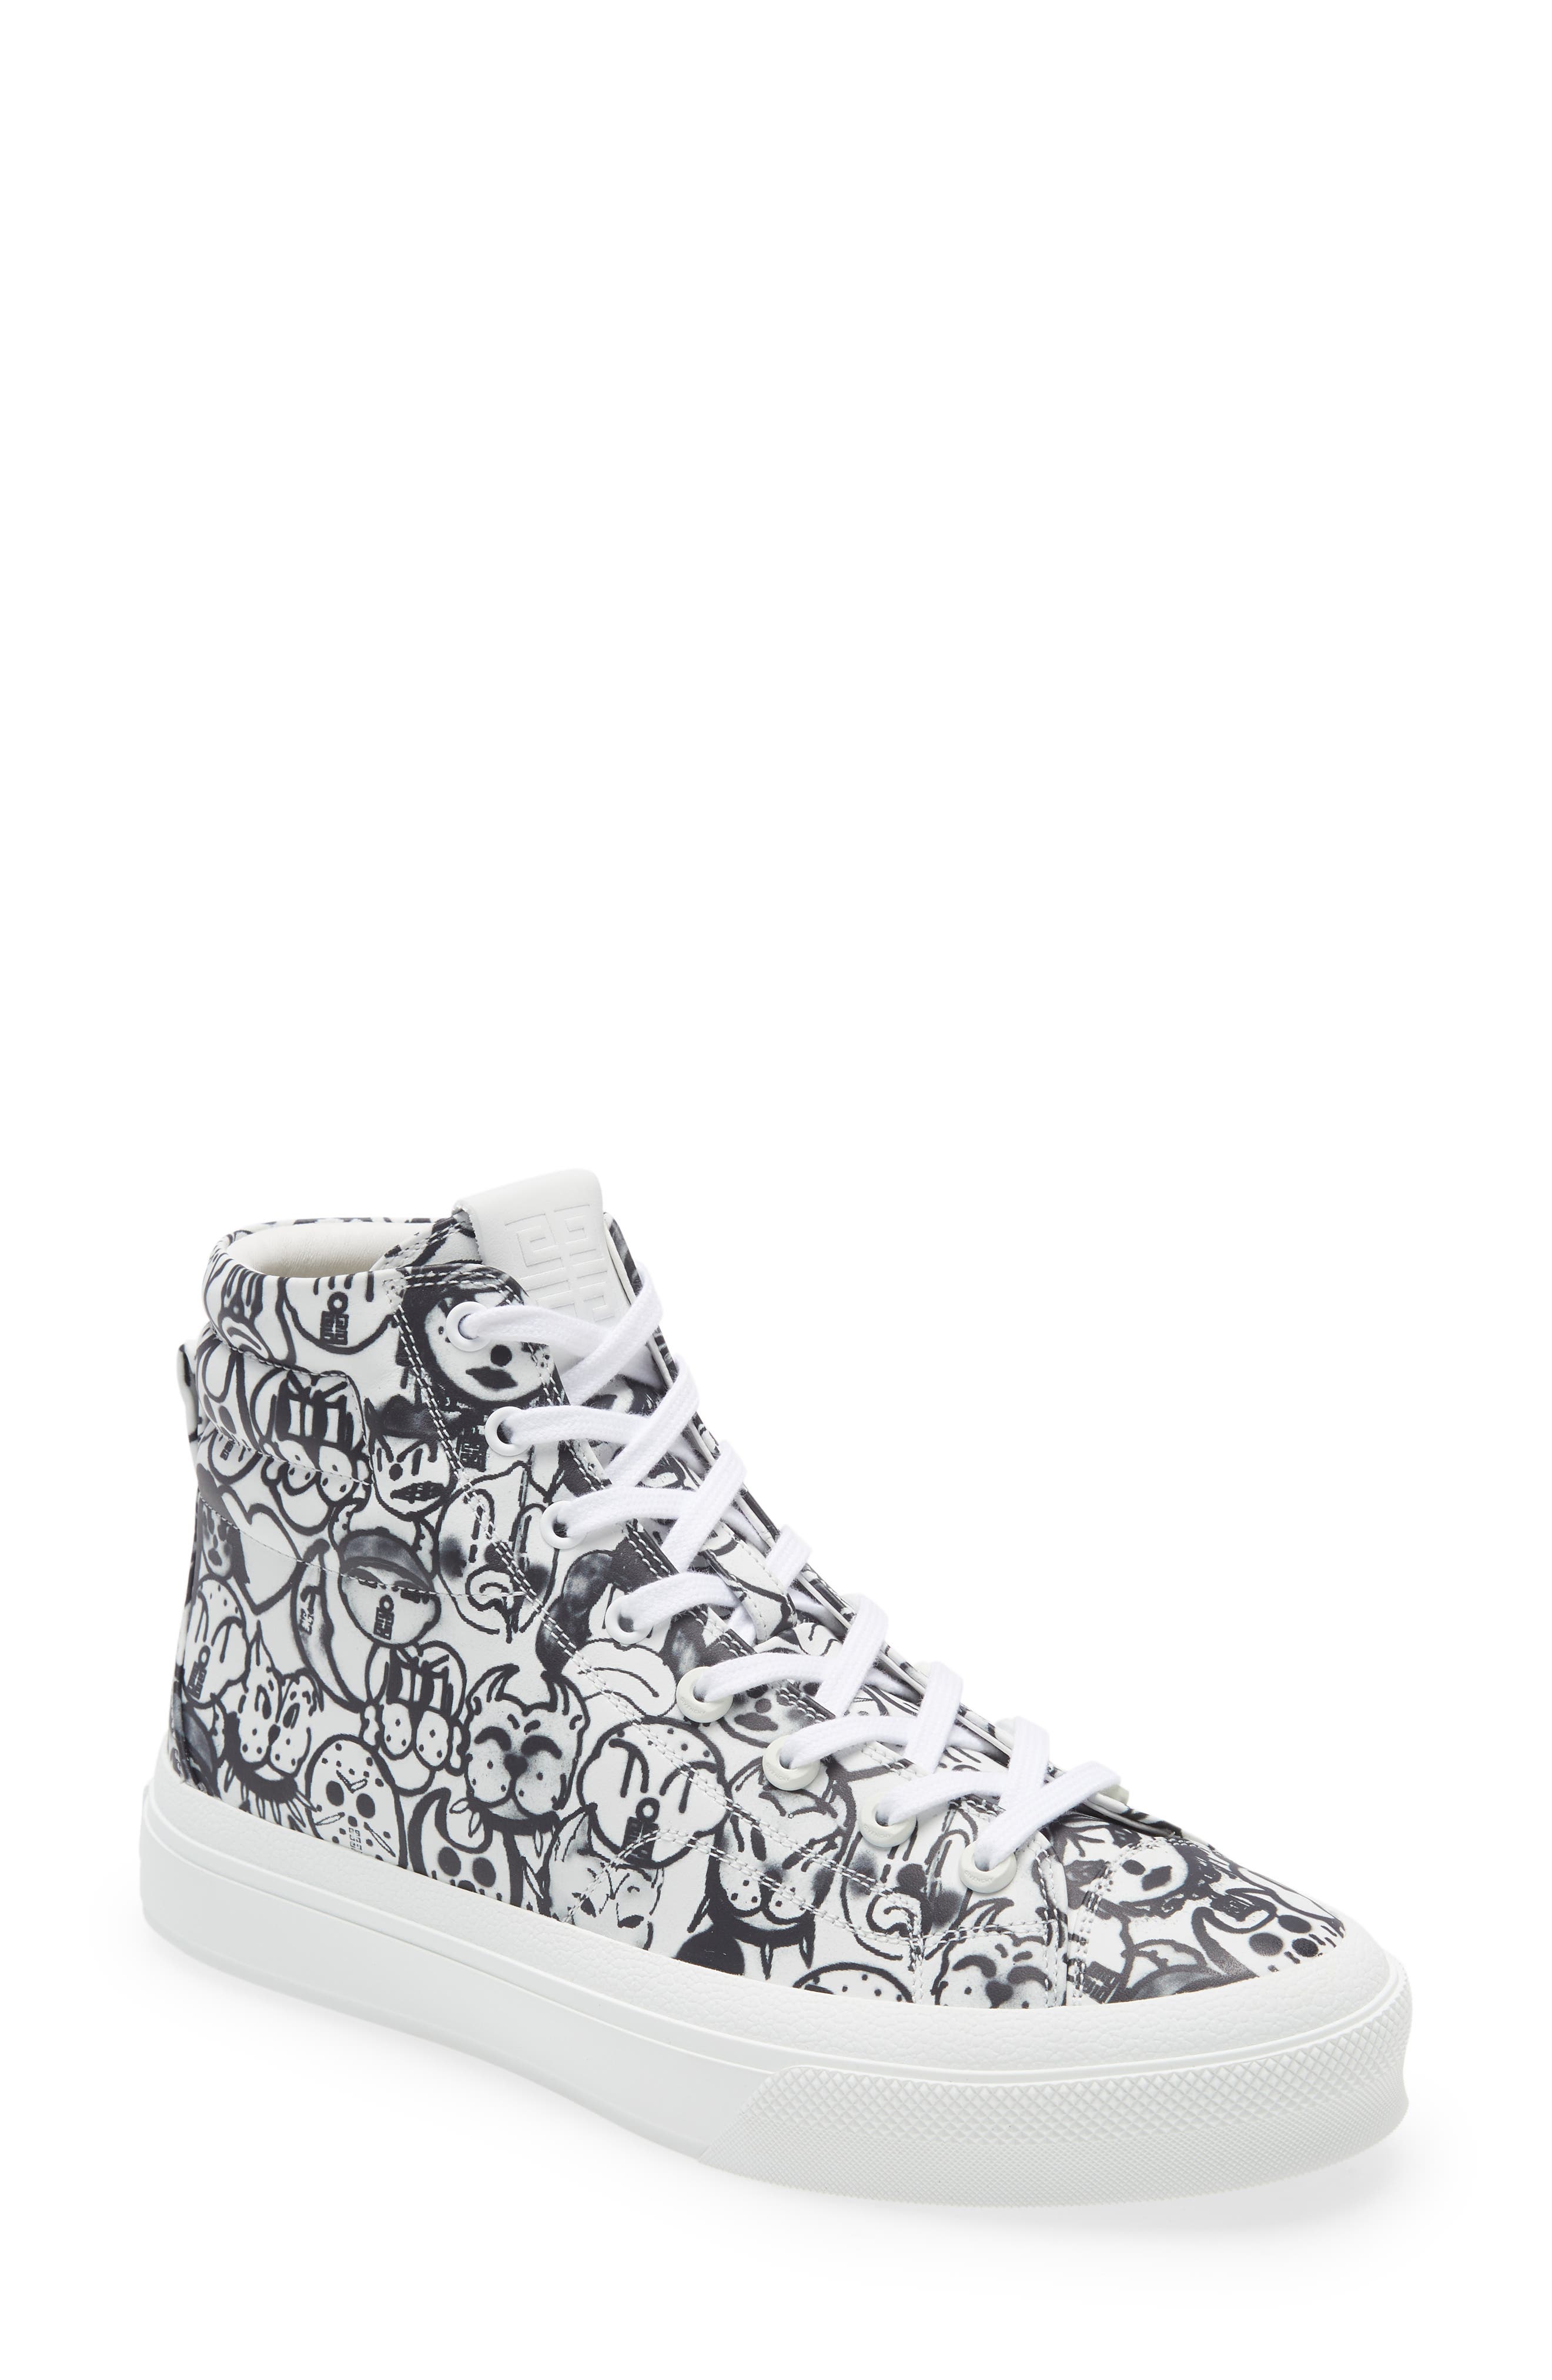 Givenchy x Chito City High Top Sneaker | Smart Closet